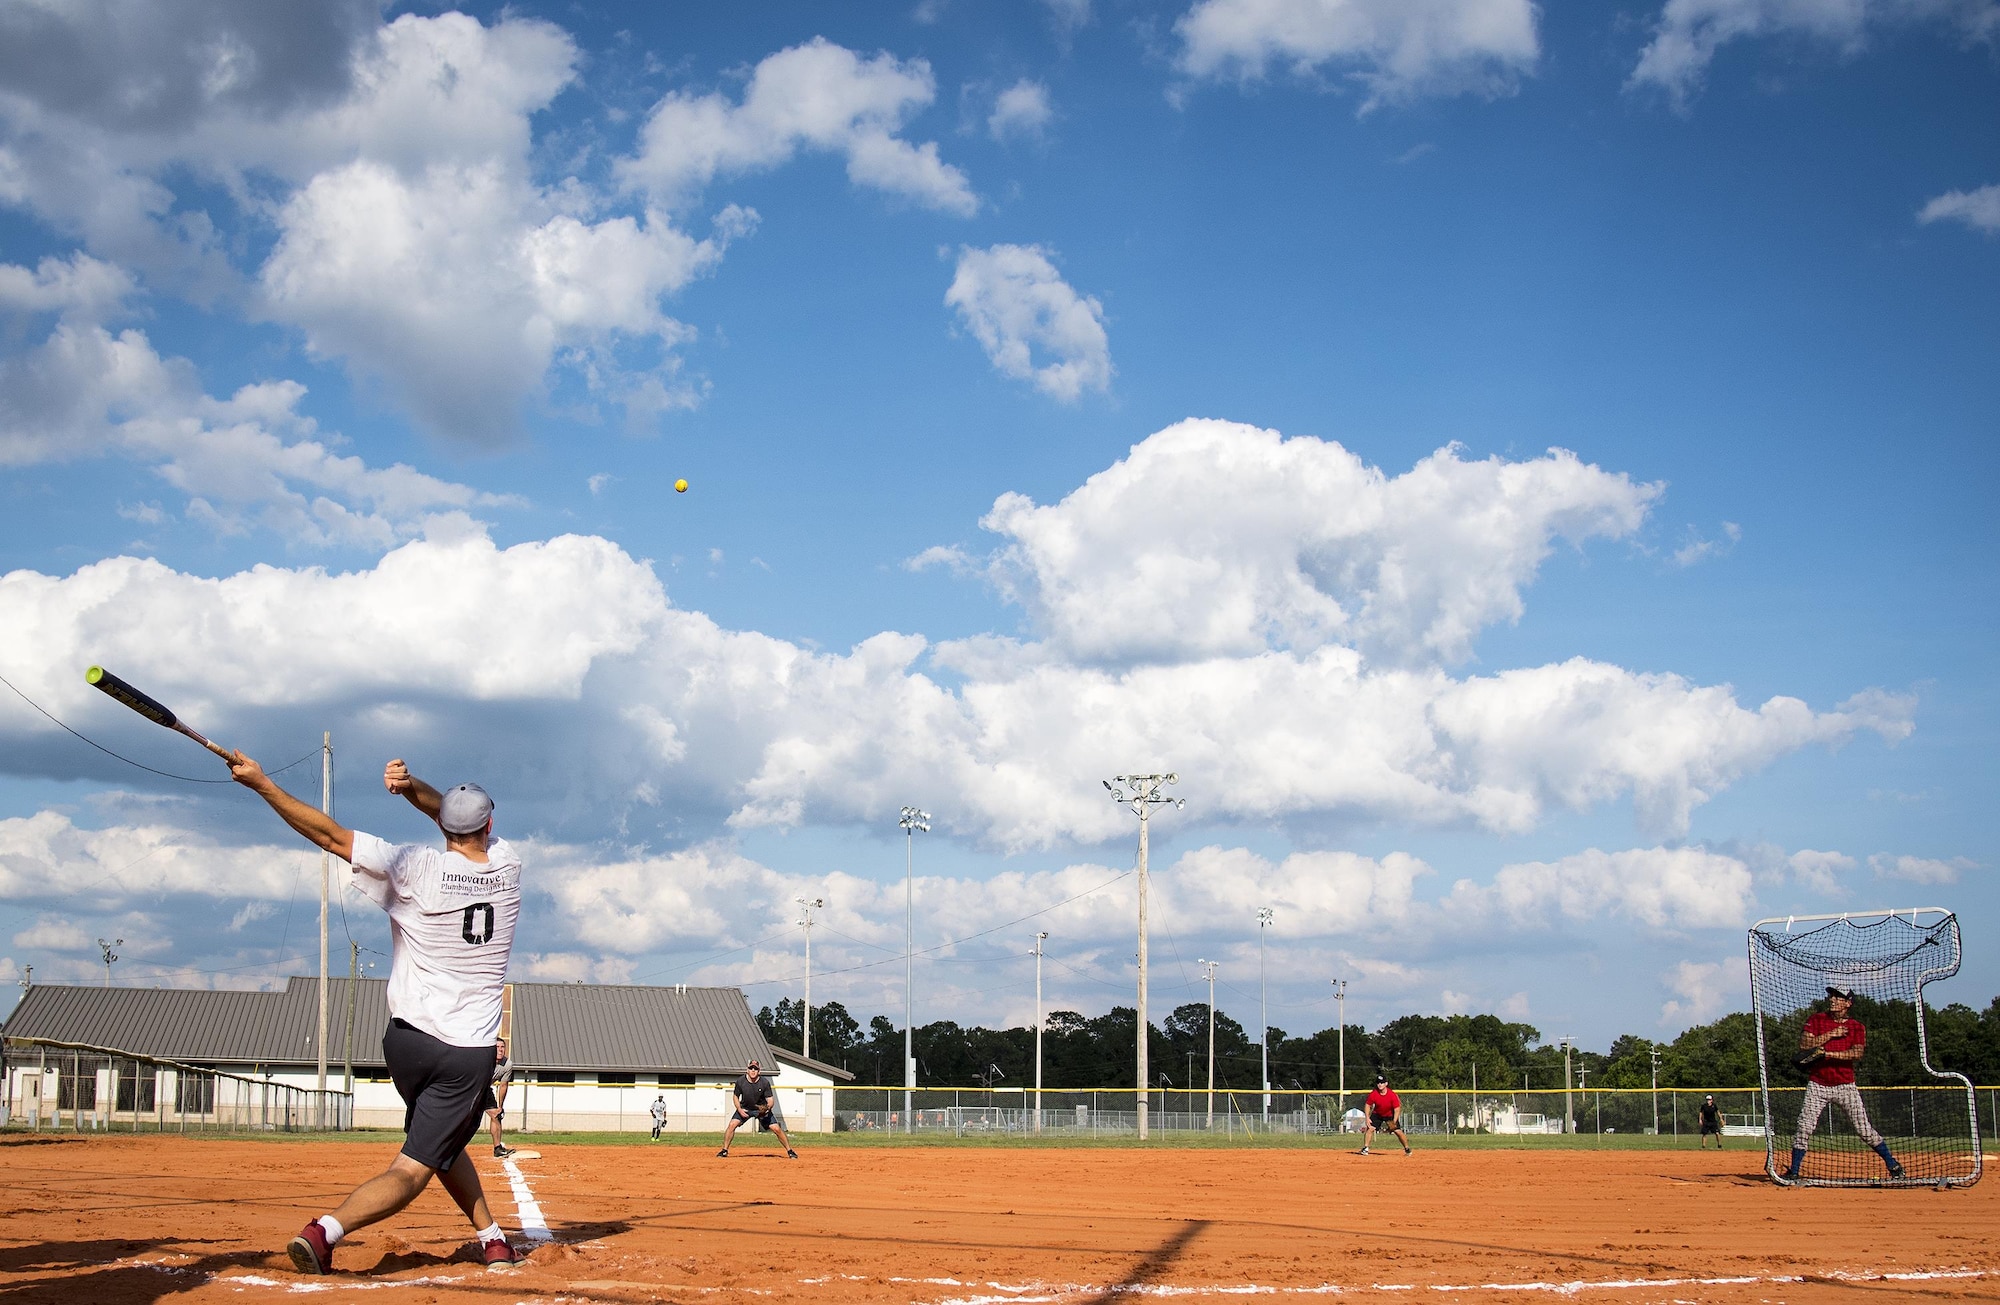 An Armament Directorate team member swings for the fences during an intramural softball game at Eglin Air Force Base, Fla., June 8.  The EB team bashed the hapless Air Force Research Lab team 14-4 in five innings of play.  (U.S. Air Force photo/Samuel King Jr.)